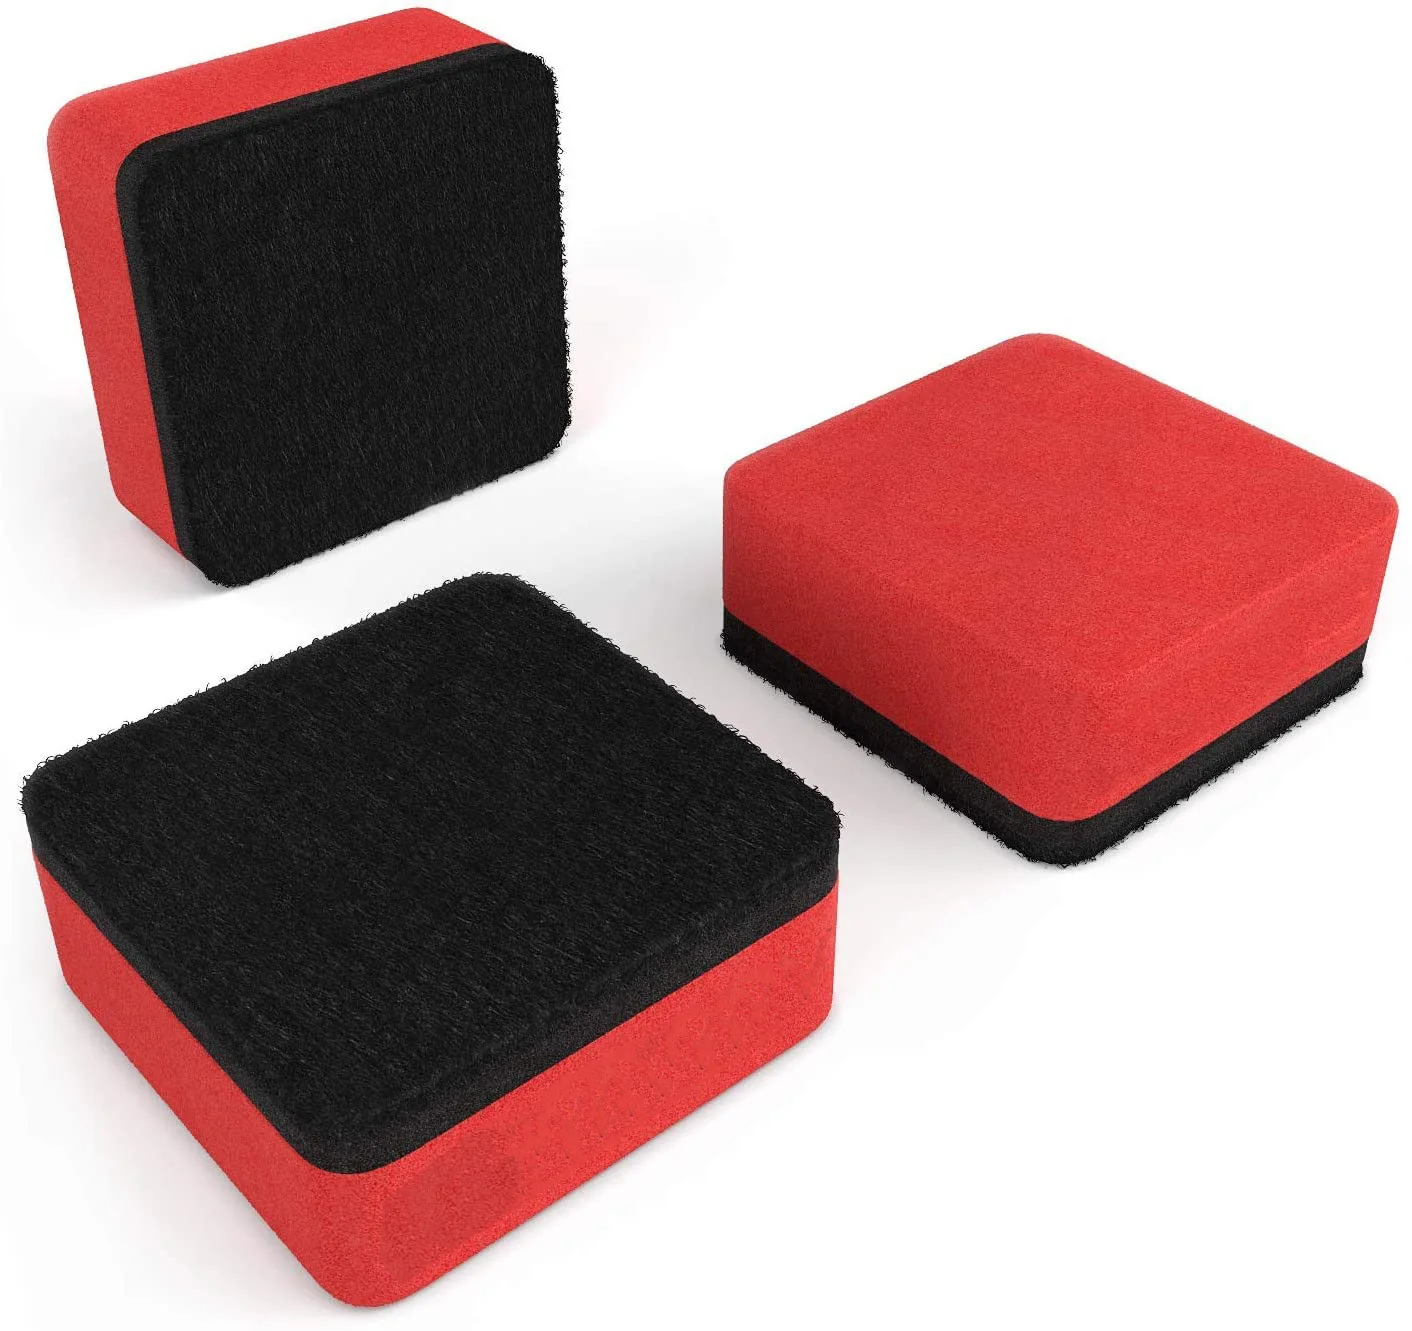 Small Magnetic Whiteboard Dry Erasers, Perfect for the Office, Σπίτι, or Classroom